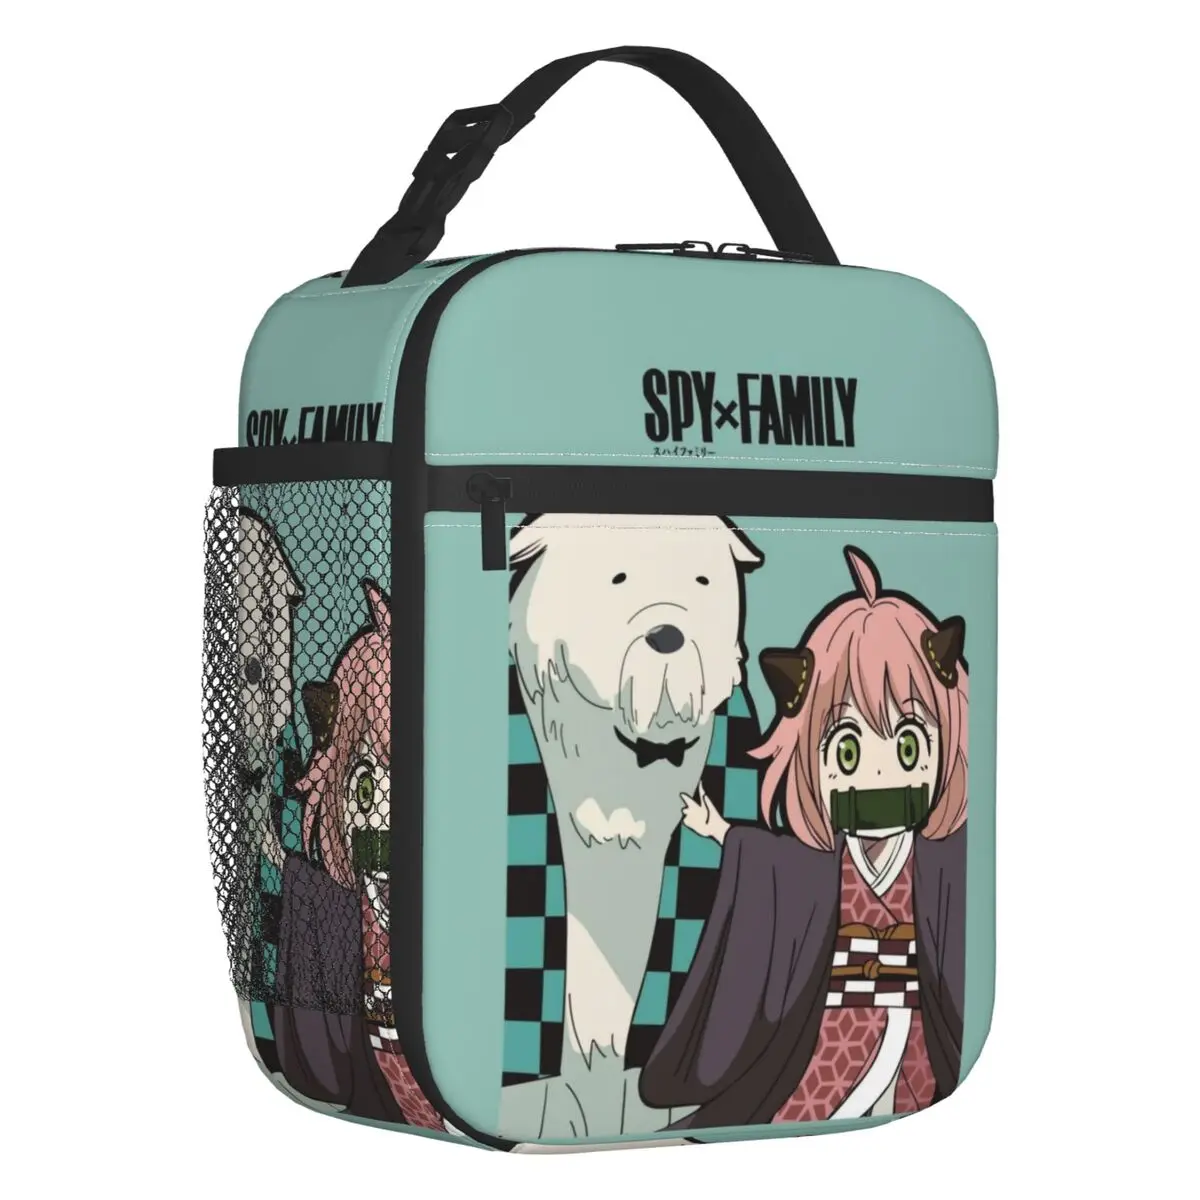 

Spy X Family Anya Bond Cartoon Anime Thermal Insulated Lunch Bag Women Resuable Lunch Tote for Kids School Children Food Box